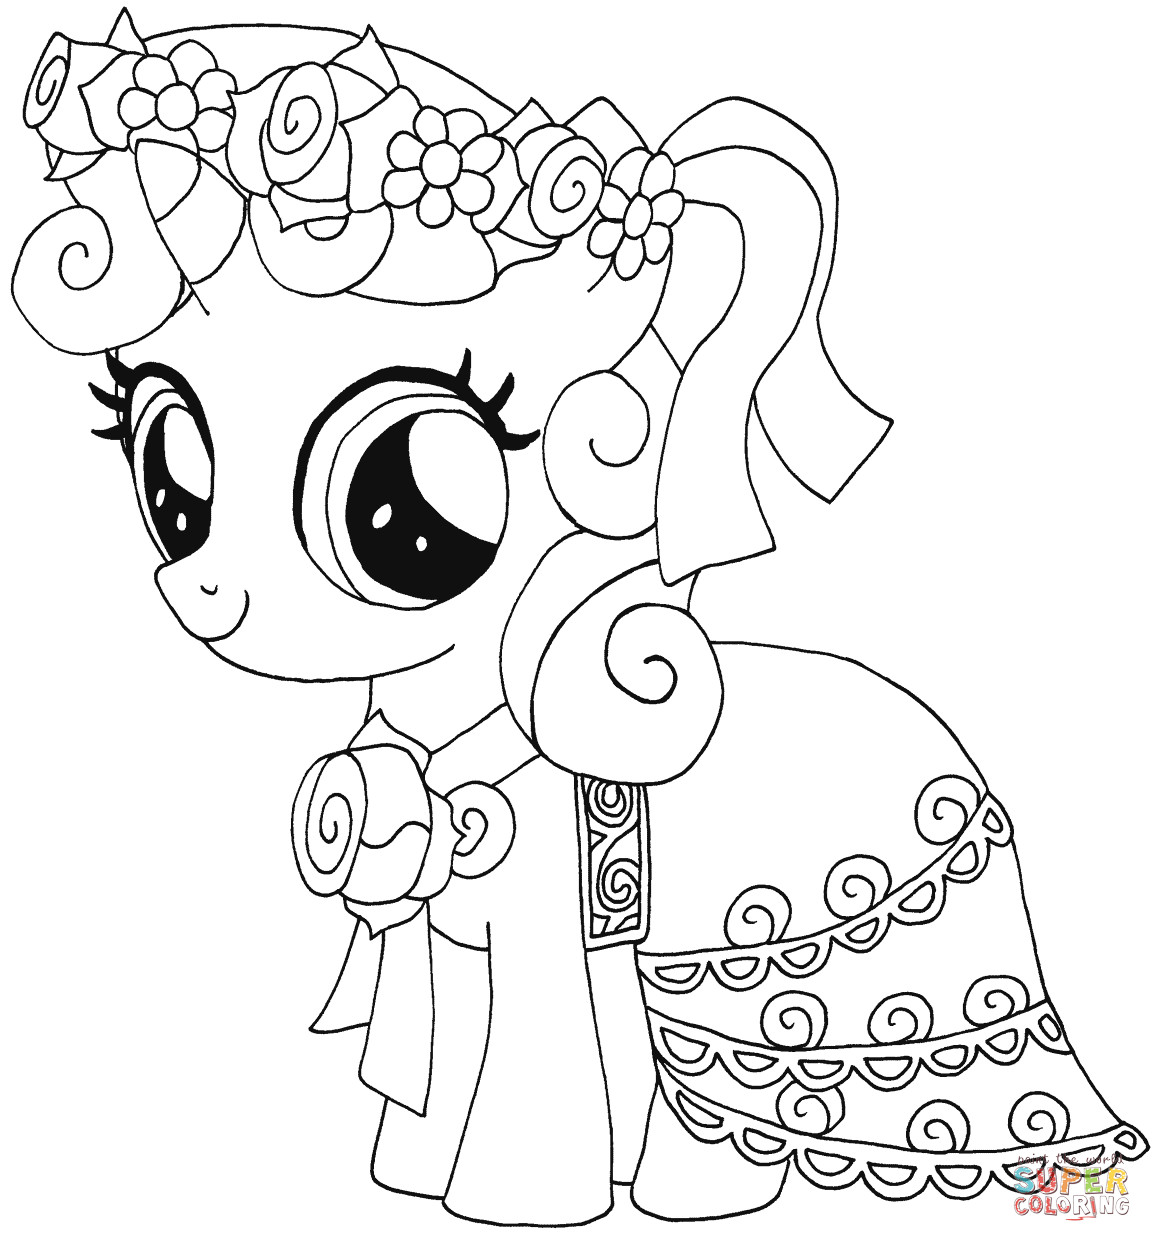 Mlp Coloring Book
 My Little Pony Sweetie Belle coloring page